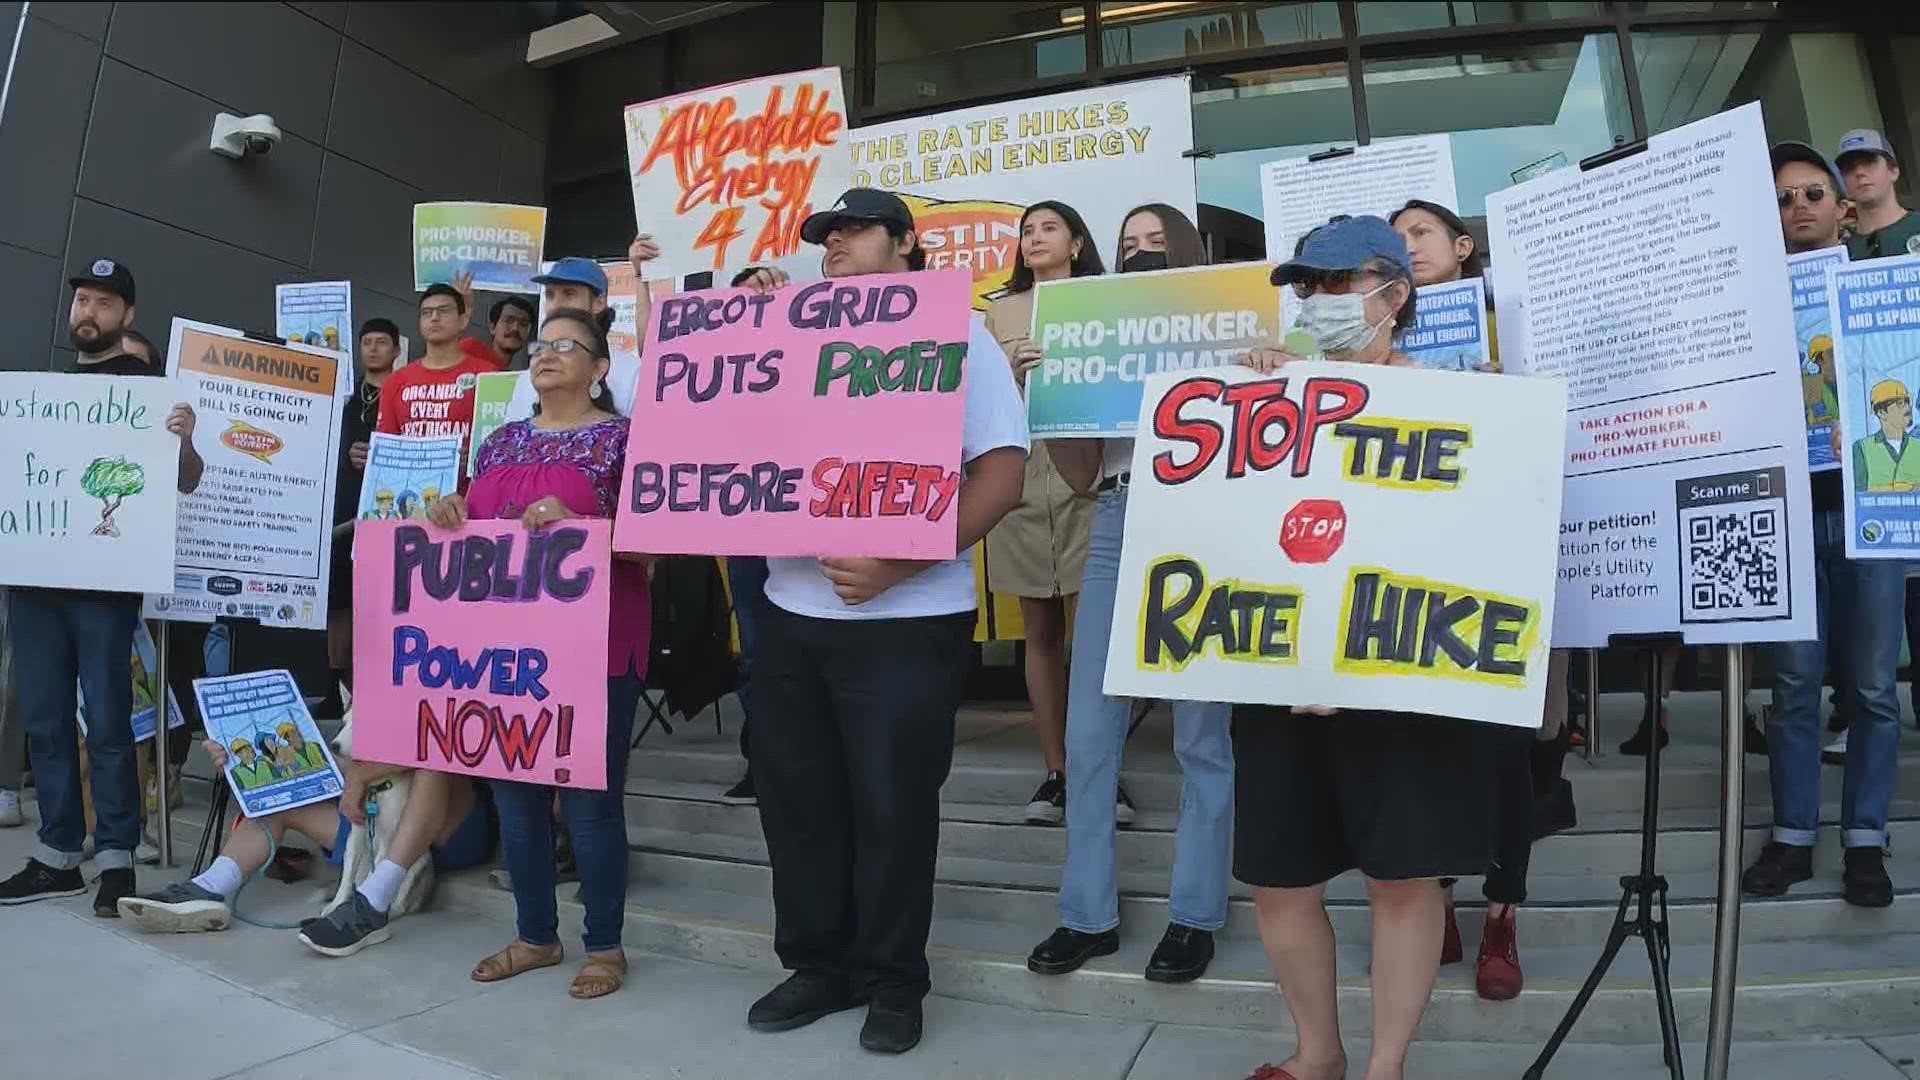 Residents and groups gathered outside the Austin Energy headquarters on Saturday to call for change.